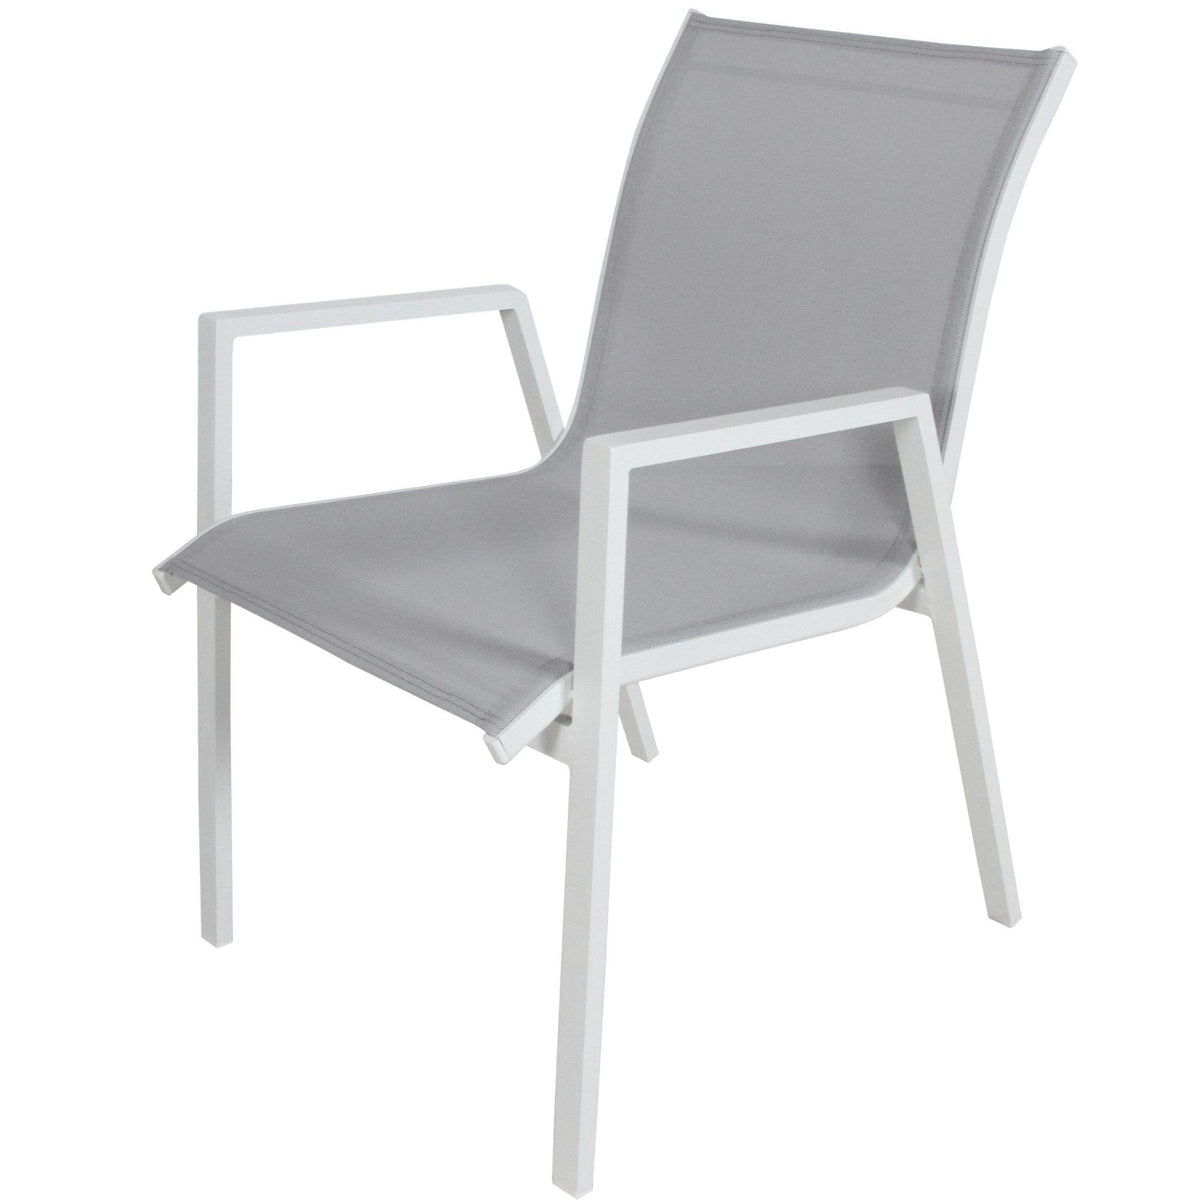 Iberia 13pc Outdoor Extensible Dining Table Chair Set White 